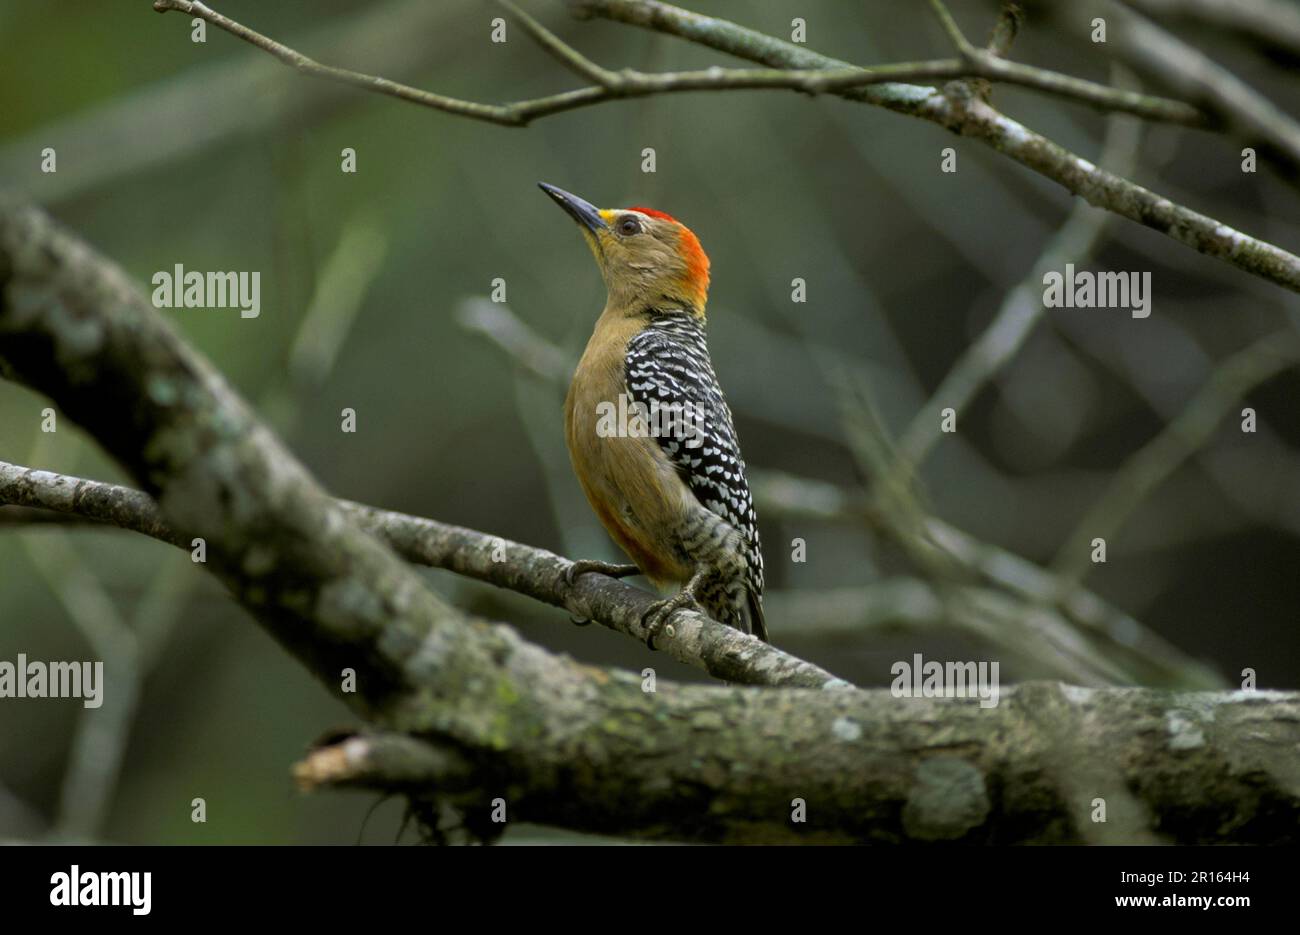 Red-crowned woodpecker (Melanerpes rubricapillus), Red-capped Woodpeckers, Woodpeckers, Animals, Birds, Woodpeckers, Redcrowned Woodpecker On branch Stock Photo